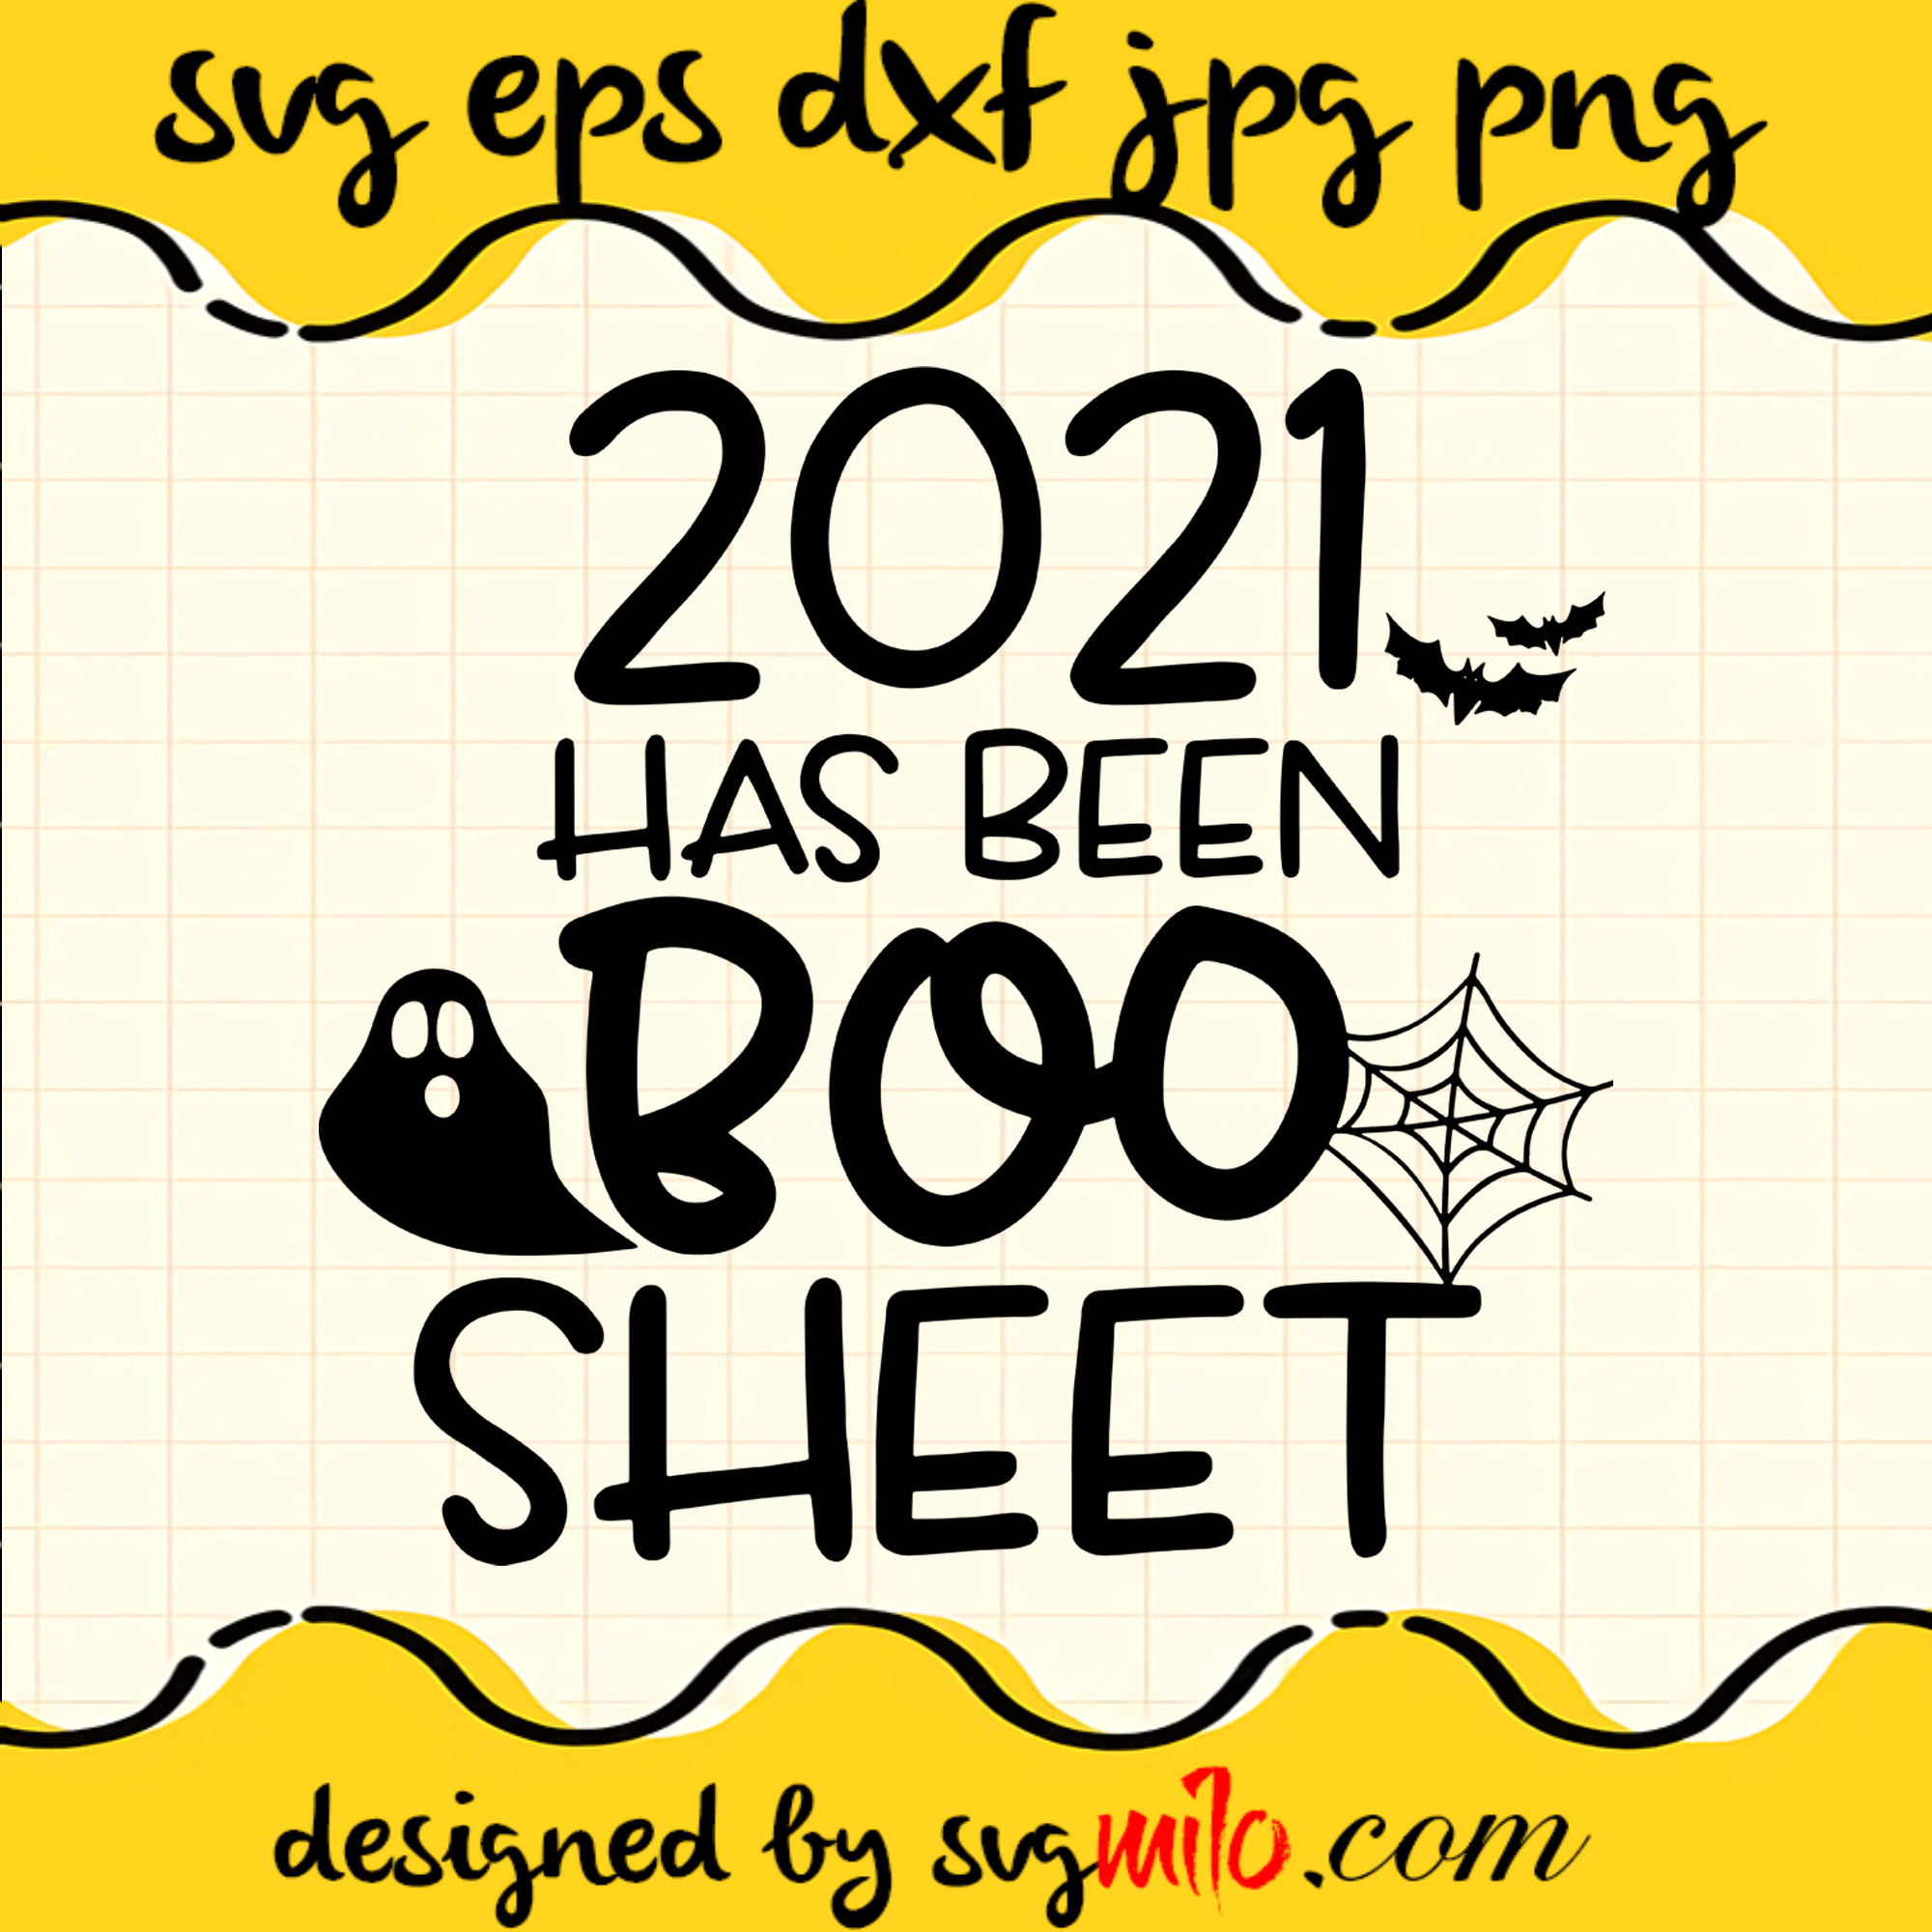 2021 Has Been Boo SVG Cut Files For Cricut Silhouette,Premium Quality SVG - SVGMILO